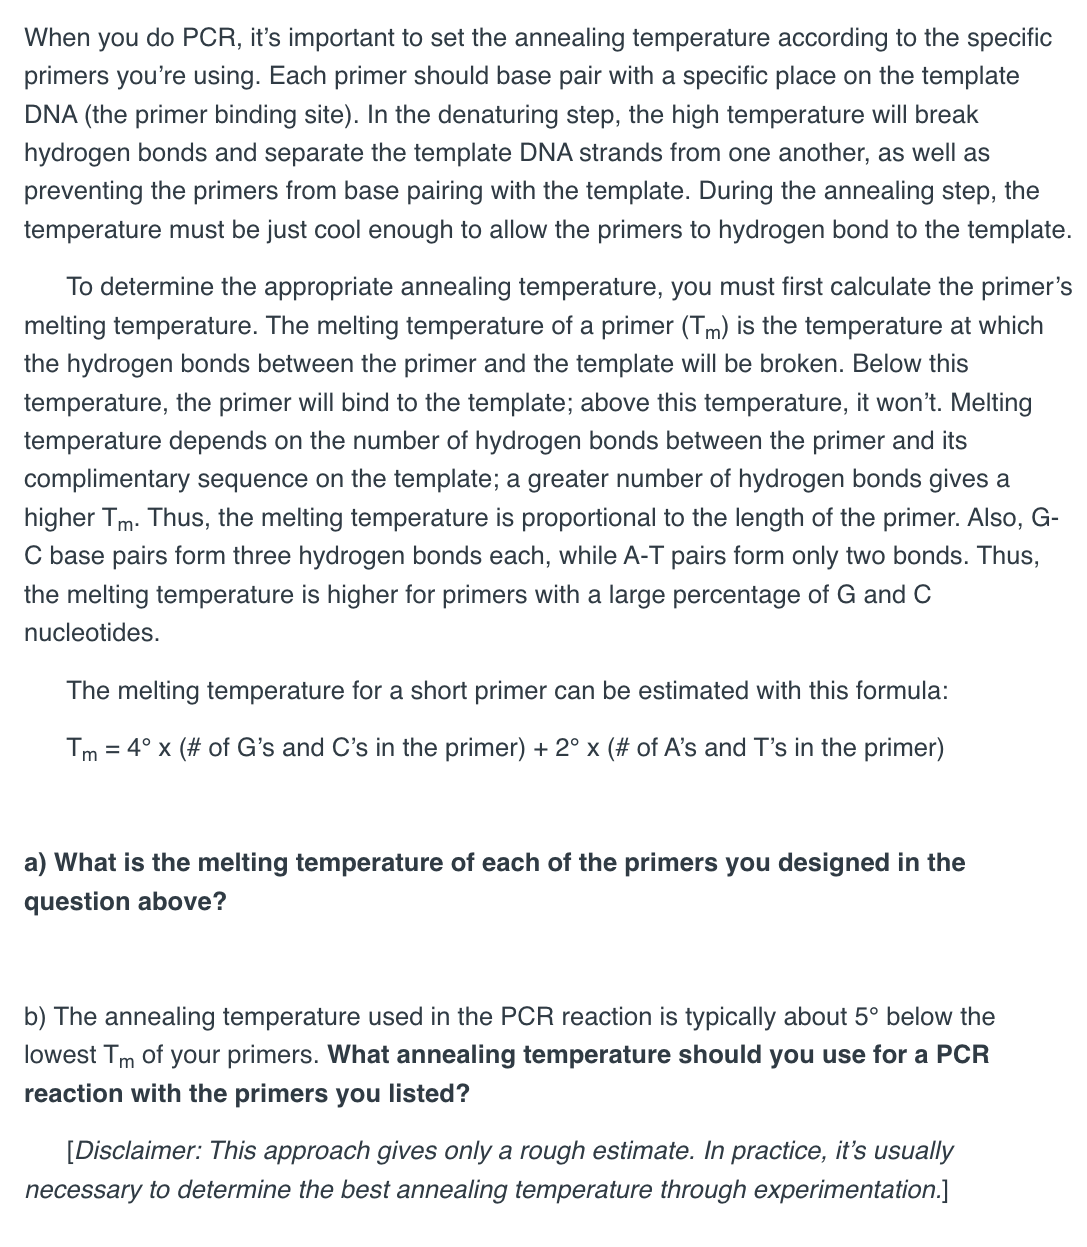 When you do PCR, it's important to set the annealing temperature according to the specific
primers you're using. Each primer should base pair with a specific place on the template
DNA (the primer binding site). In the denaturing step, the high temperature will break
hydrogen bonds and separate the template DNA strands from one another, as well as
preventing the primers from base pairing with the template. During the annealing step, the
temperature must be just cool enough to allow the primers to hydrogen bond to the template.
To determine the appropriate annealing temperature, you must first calculate the primer's
melting temperature. The melting temperature of a primer (Tm) is the temperature at which
the hydrogen bonds between the primer and the template will be broken. Below this
temperature, the primer will bind to the template; above this temperature, it won't. Melting
temperature depends on the number of hydrogen bonds between the primer and its
complimentary sequence on the template; a greater number of hydrogen bonds gives a
higher Tm. Thus, the melting temperature is proportional to the length of the primer. Also, G-
C base pairs form three hydrogen bonds each, while A-T pairs form only two bonds. Thus,
the melting temperature is higher for primers with a large percentage of G and C
nucleotides.
The melting temperature for a short primer can be estimated with this formula:
Tm = 4° x (# of G's and C's in the primer) + 2° x (# of A's and T's in the primer)
a) What is the melting temperature of each of the primers you designed in the
question above?
b) The annealing temperature used in the PCR reaction is typically about 5° below the
lowest Tm of your primers. What annealing temperature should you use for a PCR
reaction with the primers you listed?
[Disclaimer: This approach gives only a rough estimate. In practice, it's usually
necessary to determine the best annealing temperature through experimentation.]